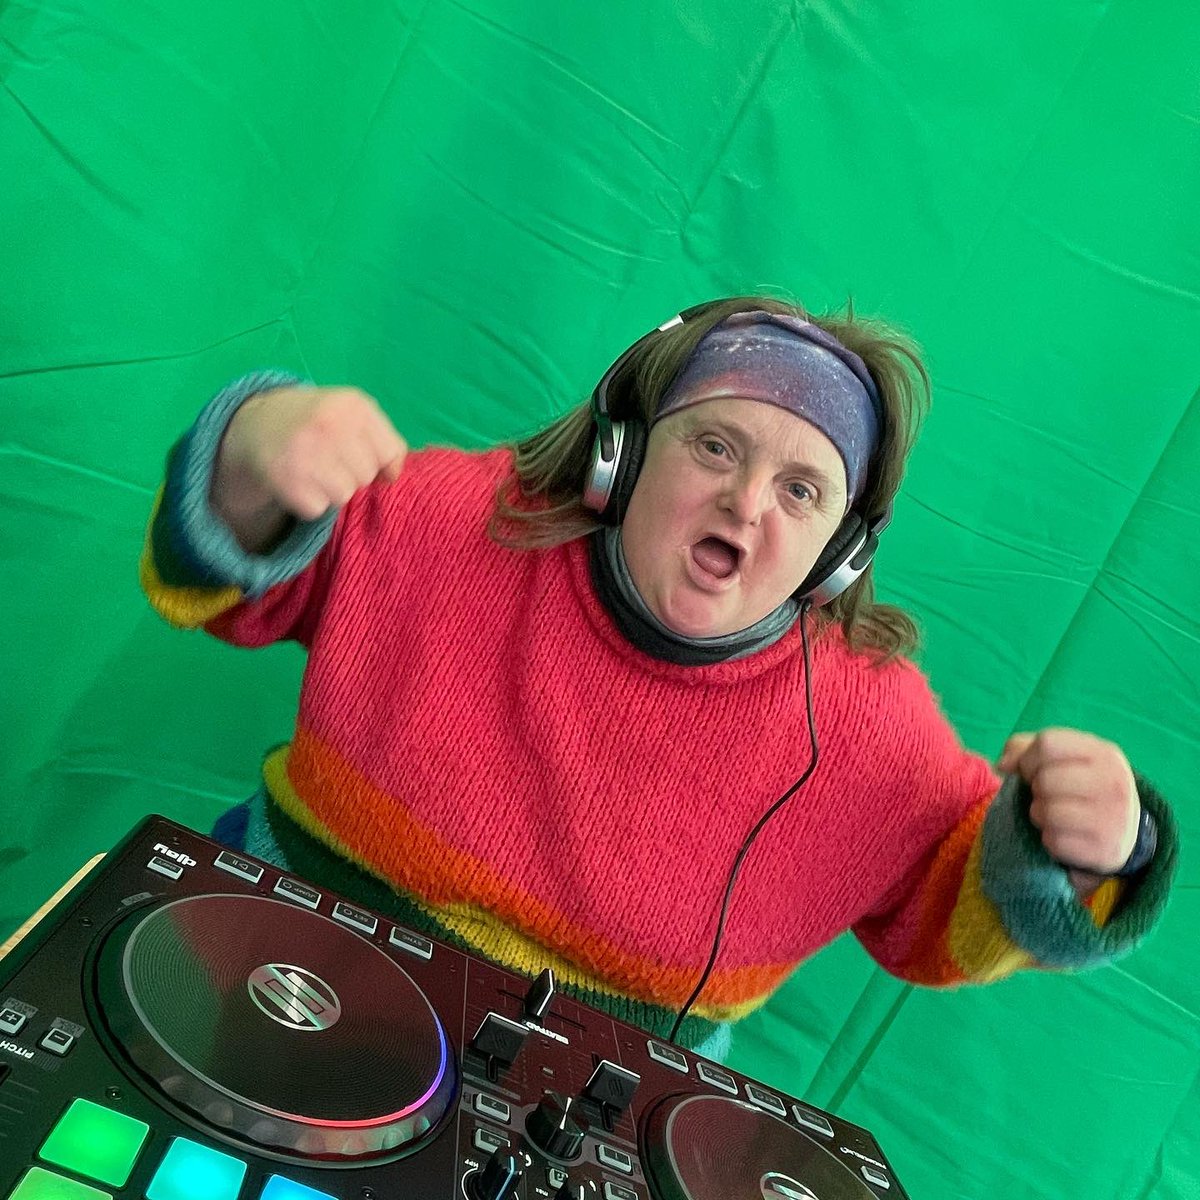 DJ Red Factor and DJ Rock are getting their sets ready for our first live gigs! If you’d like to join our #DJAcademy on Thursday’s or find out more, visit our website at thetwistingducks.co.uk
#artistswithlearningdisabilities #performance #livegigs #clubmusic #newcastleupontyne